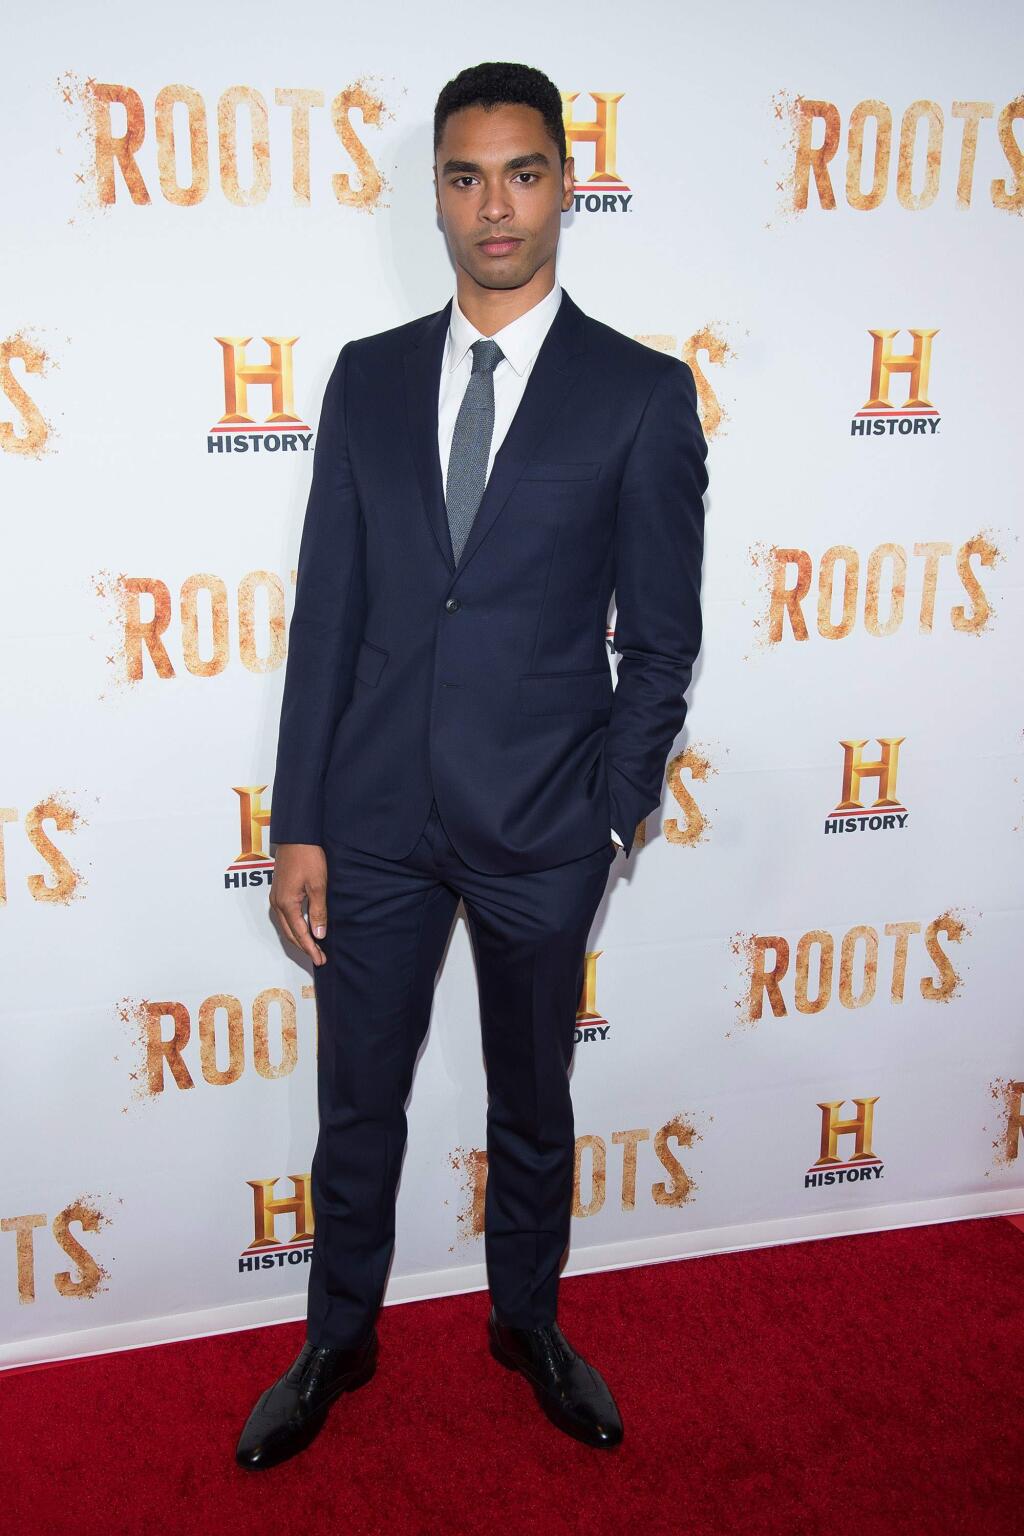 Rege-Jean Page attends History Channel's 'Roots' mini-series premiere at Alice Tully Hall on Monday, May 23, 2016, in New York. (Photo by Charles Sykes/Invision/AP)